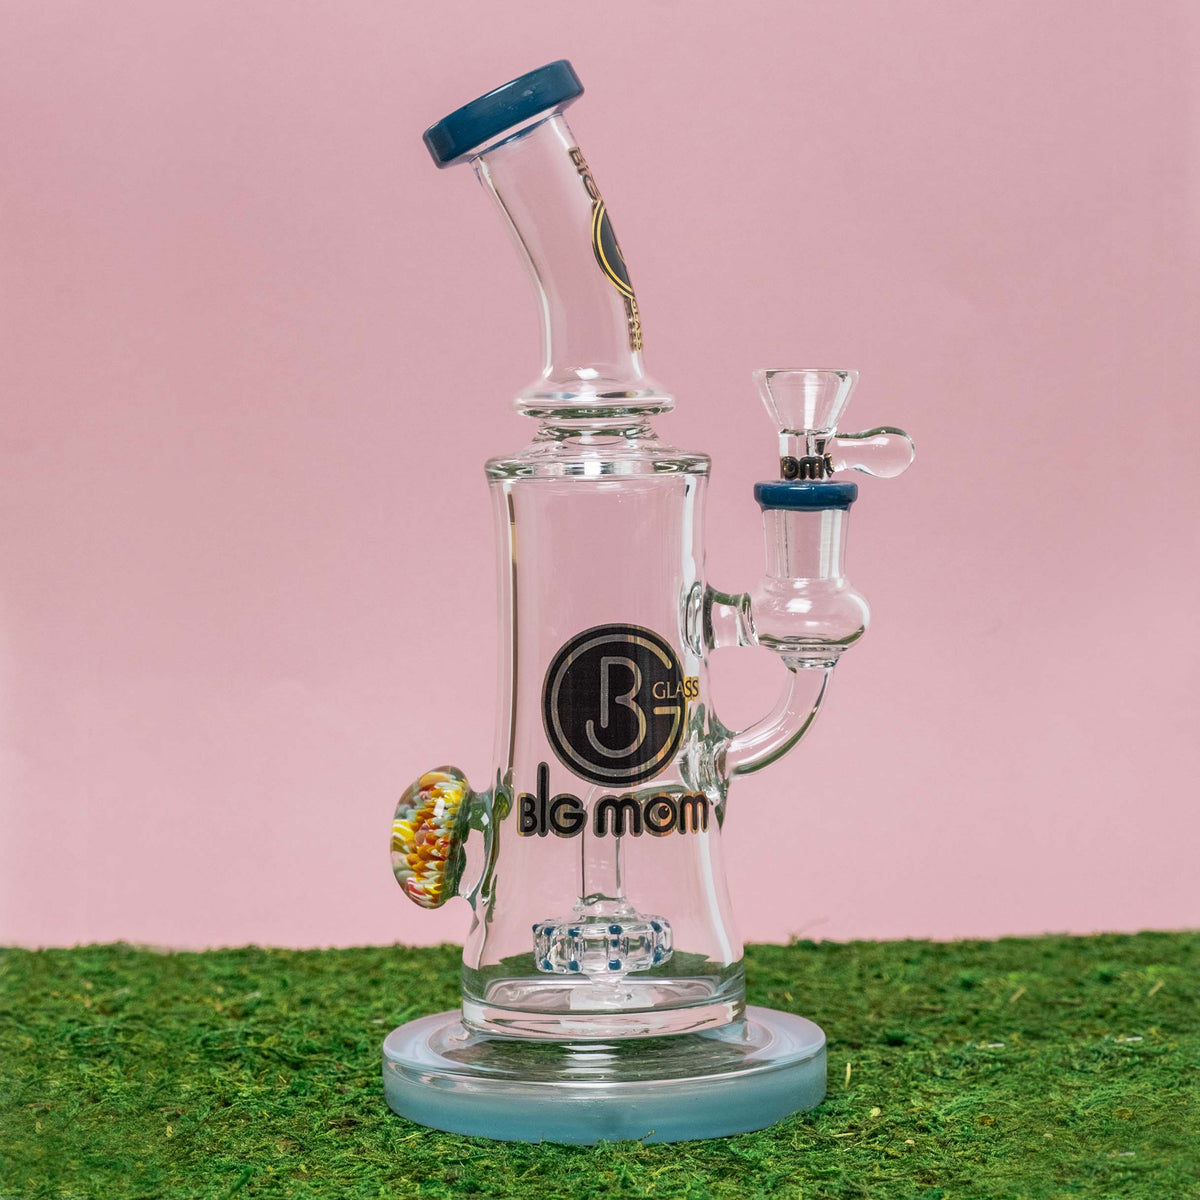 Bulk Order Premium Panlong Water Pipe With Double Dragon Head, Includes Pot  Accessories, Glass Bongs, And Color Models Ideal For Smoking Ships In Bulk  From Chenlijun188, $13.88